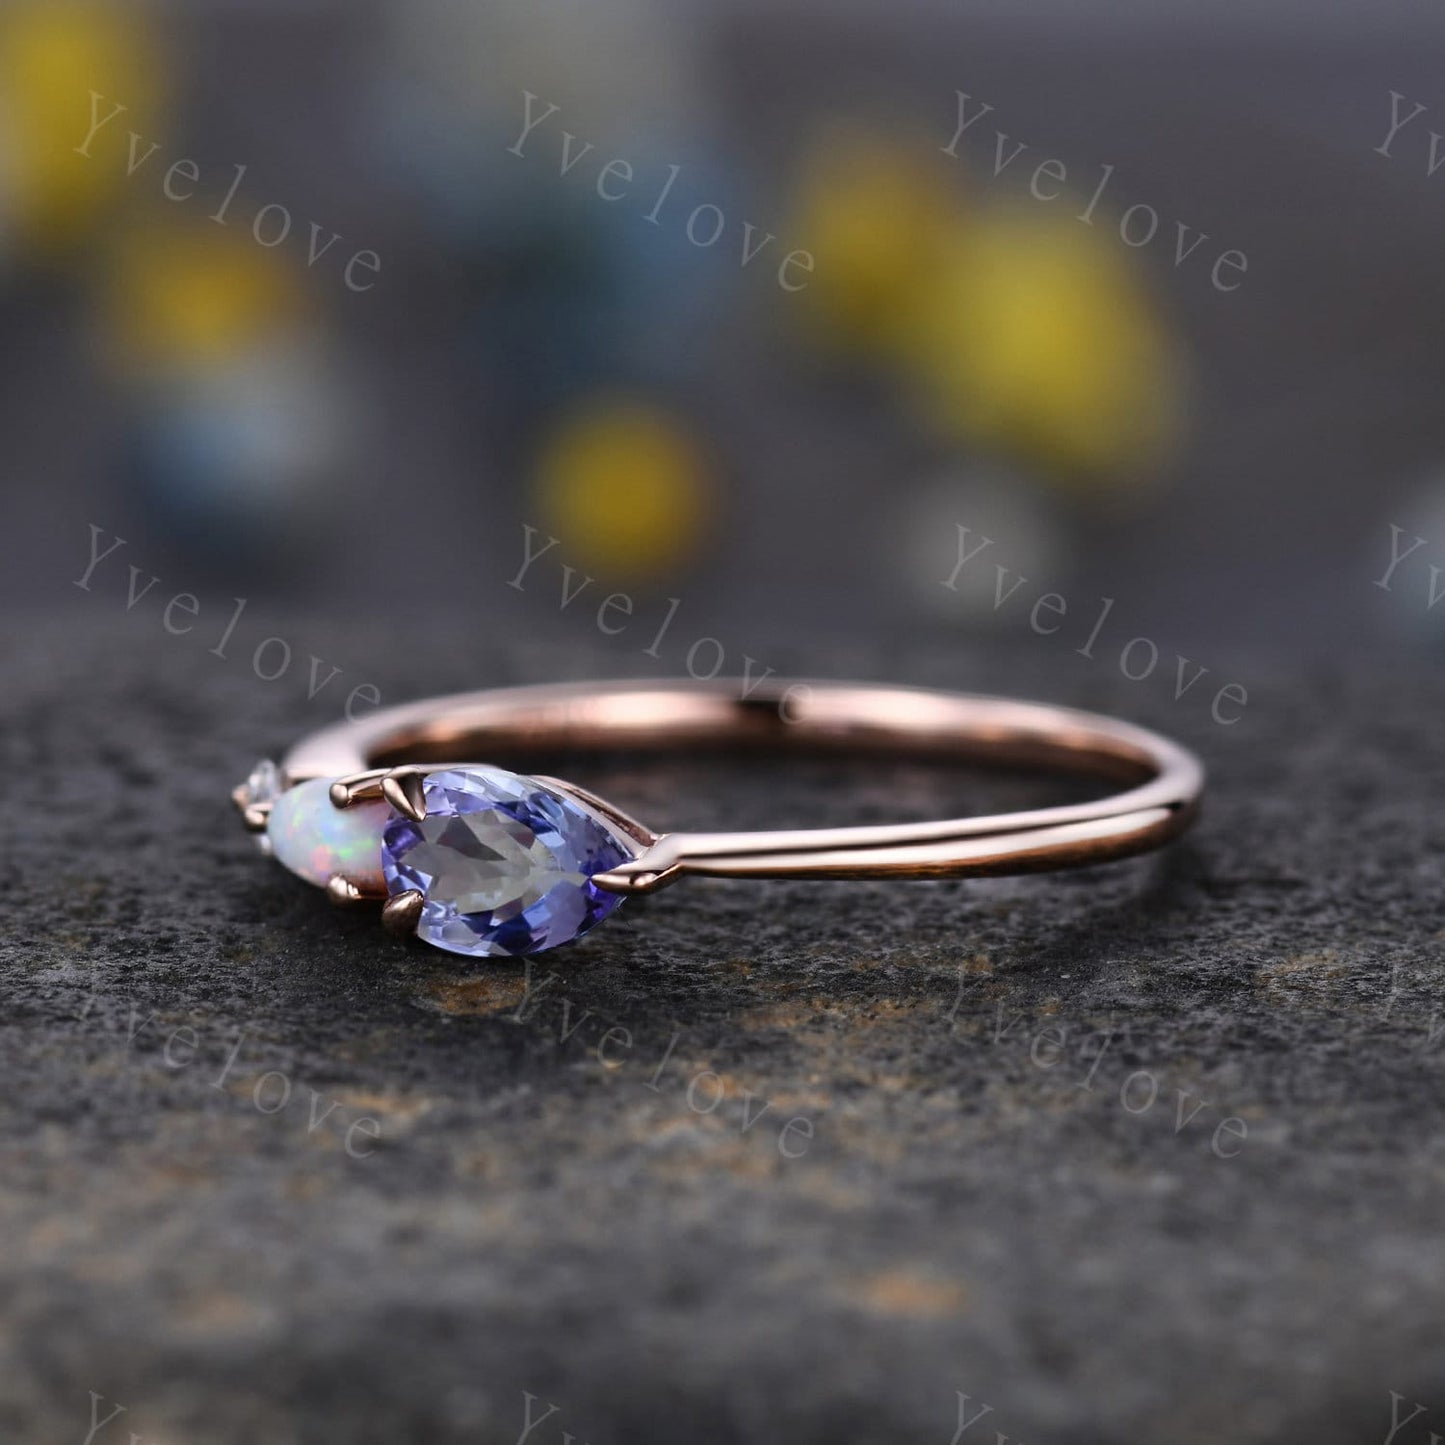 Vintage Tanzanite Opal Ring Engagement Ring,Pear Cut Gems,Art Deco Moissanite Wedding Band,3 Stone Unique Women Bridal Promise Ring,Silver